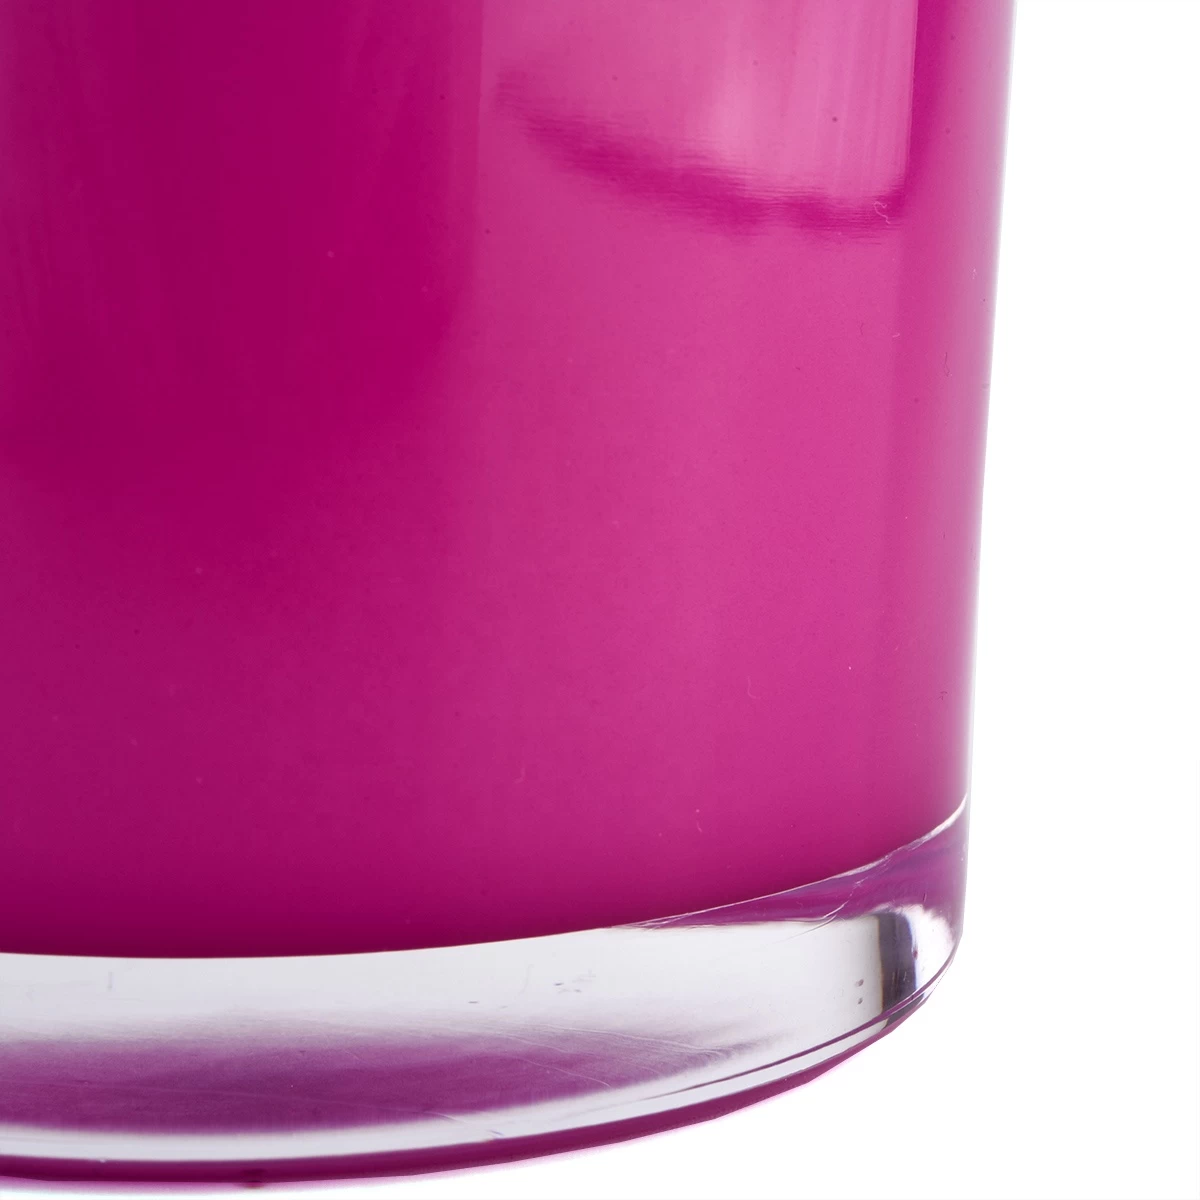 Gradient color glass candle holders for candle wax